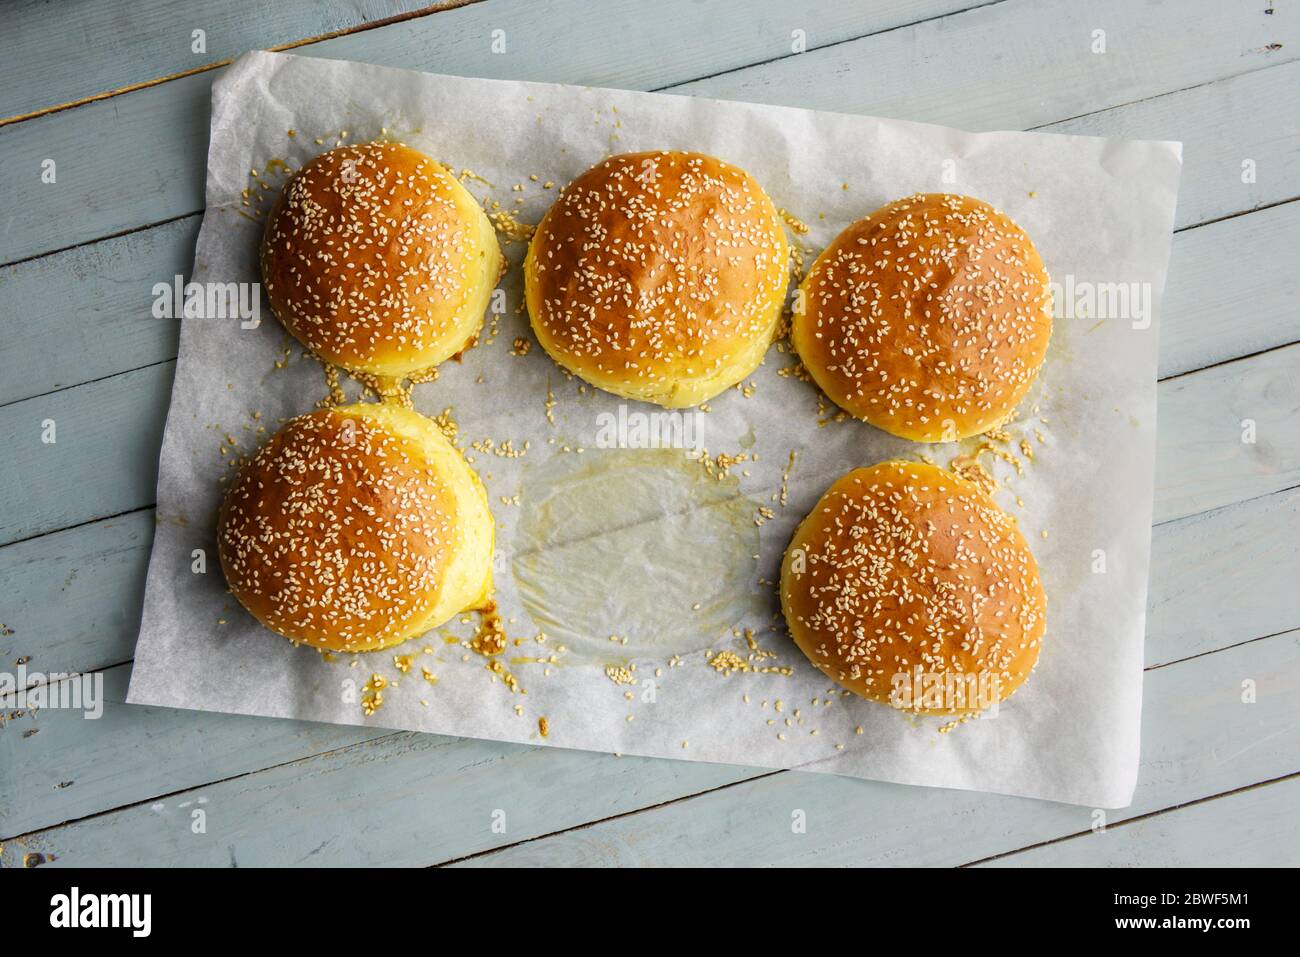 Homemade burger bun on bakery parchment on wooden table. Food photography Stock Photo